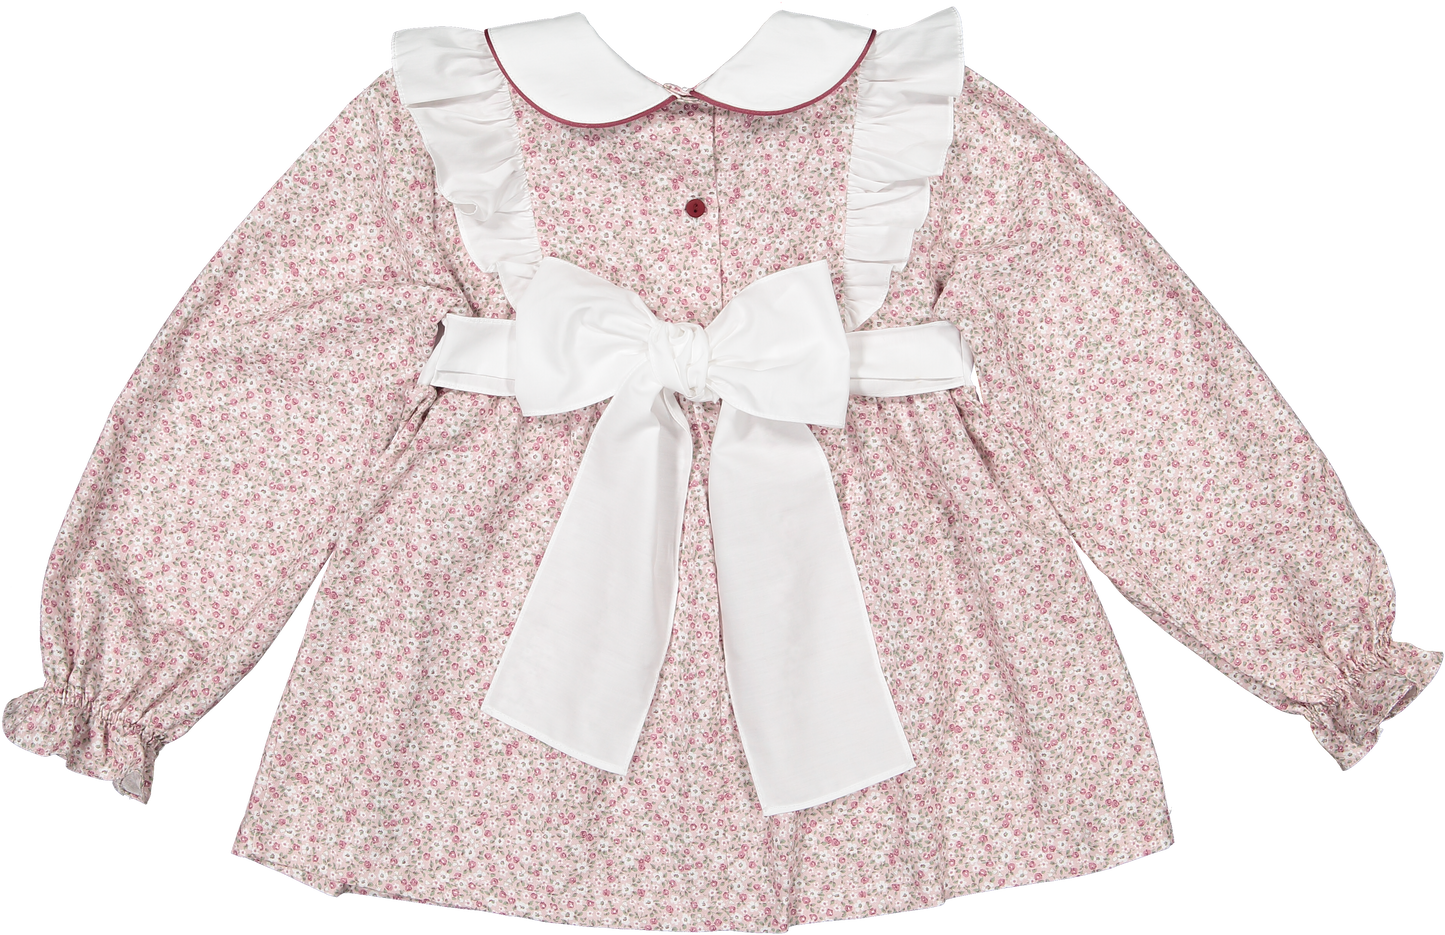 Raspberry girls top with a mauve floral print and maroon piping around the peter pan collar with a white bow on the back of the blouse by Sal & Pimenta. 